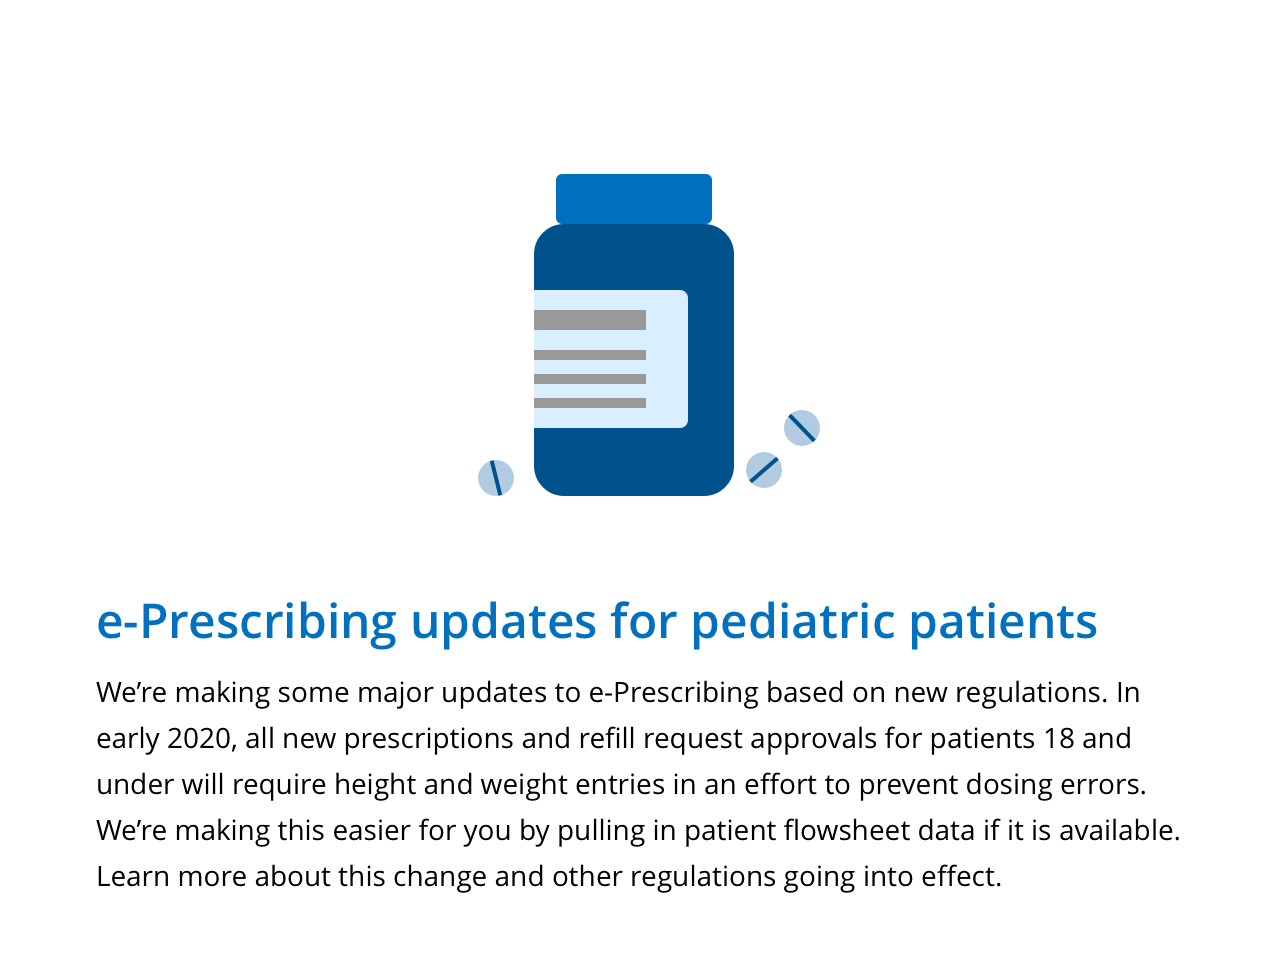 We're making some major updates to e-Prescribing based on new regulations. In early 2020, all new prescriptions and refil request approvals for patients 18 an dunder will require height and weight entries in an effort to prevent dosing errors. We're making this easier for you by pulling in patient flowsheet data if it is available. Learn more about his change and other regulations going into effect.